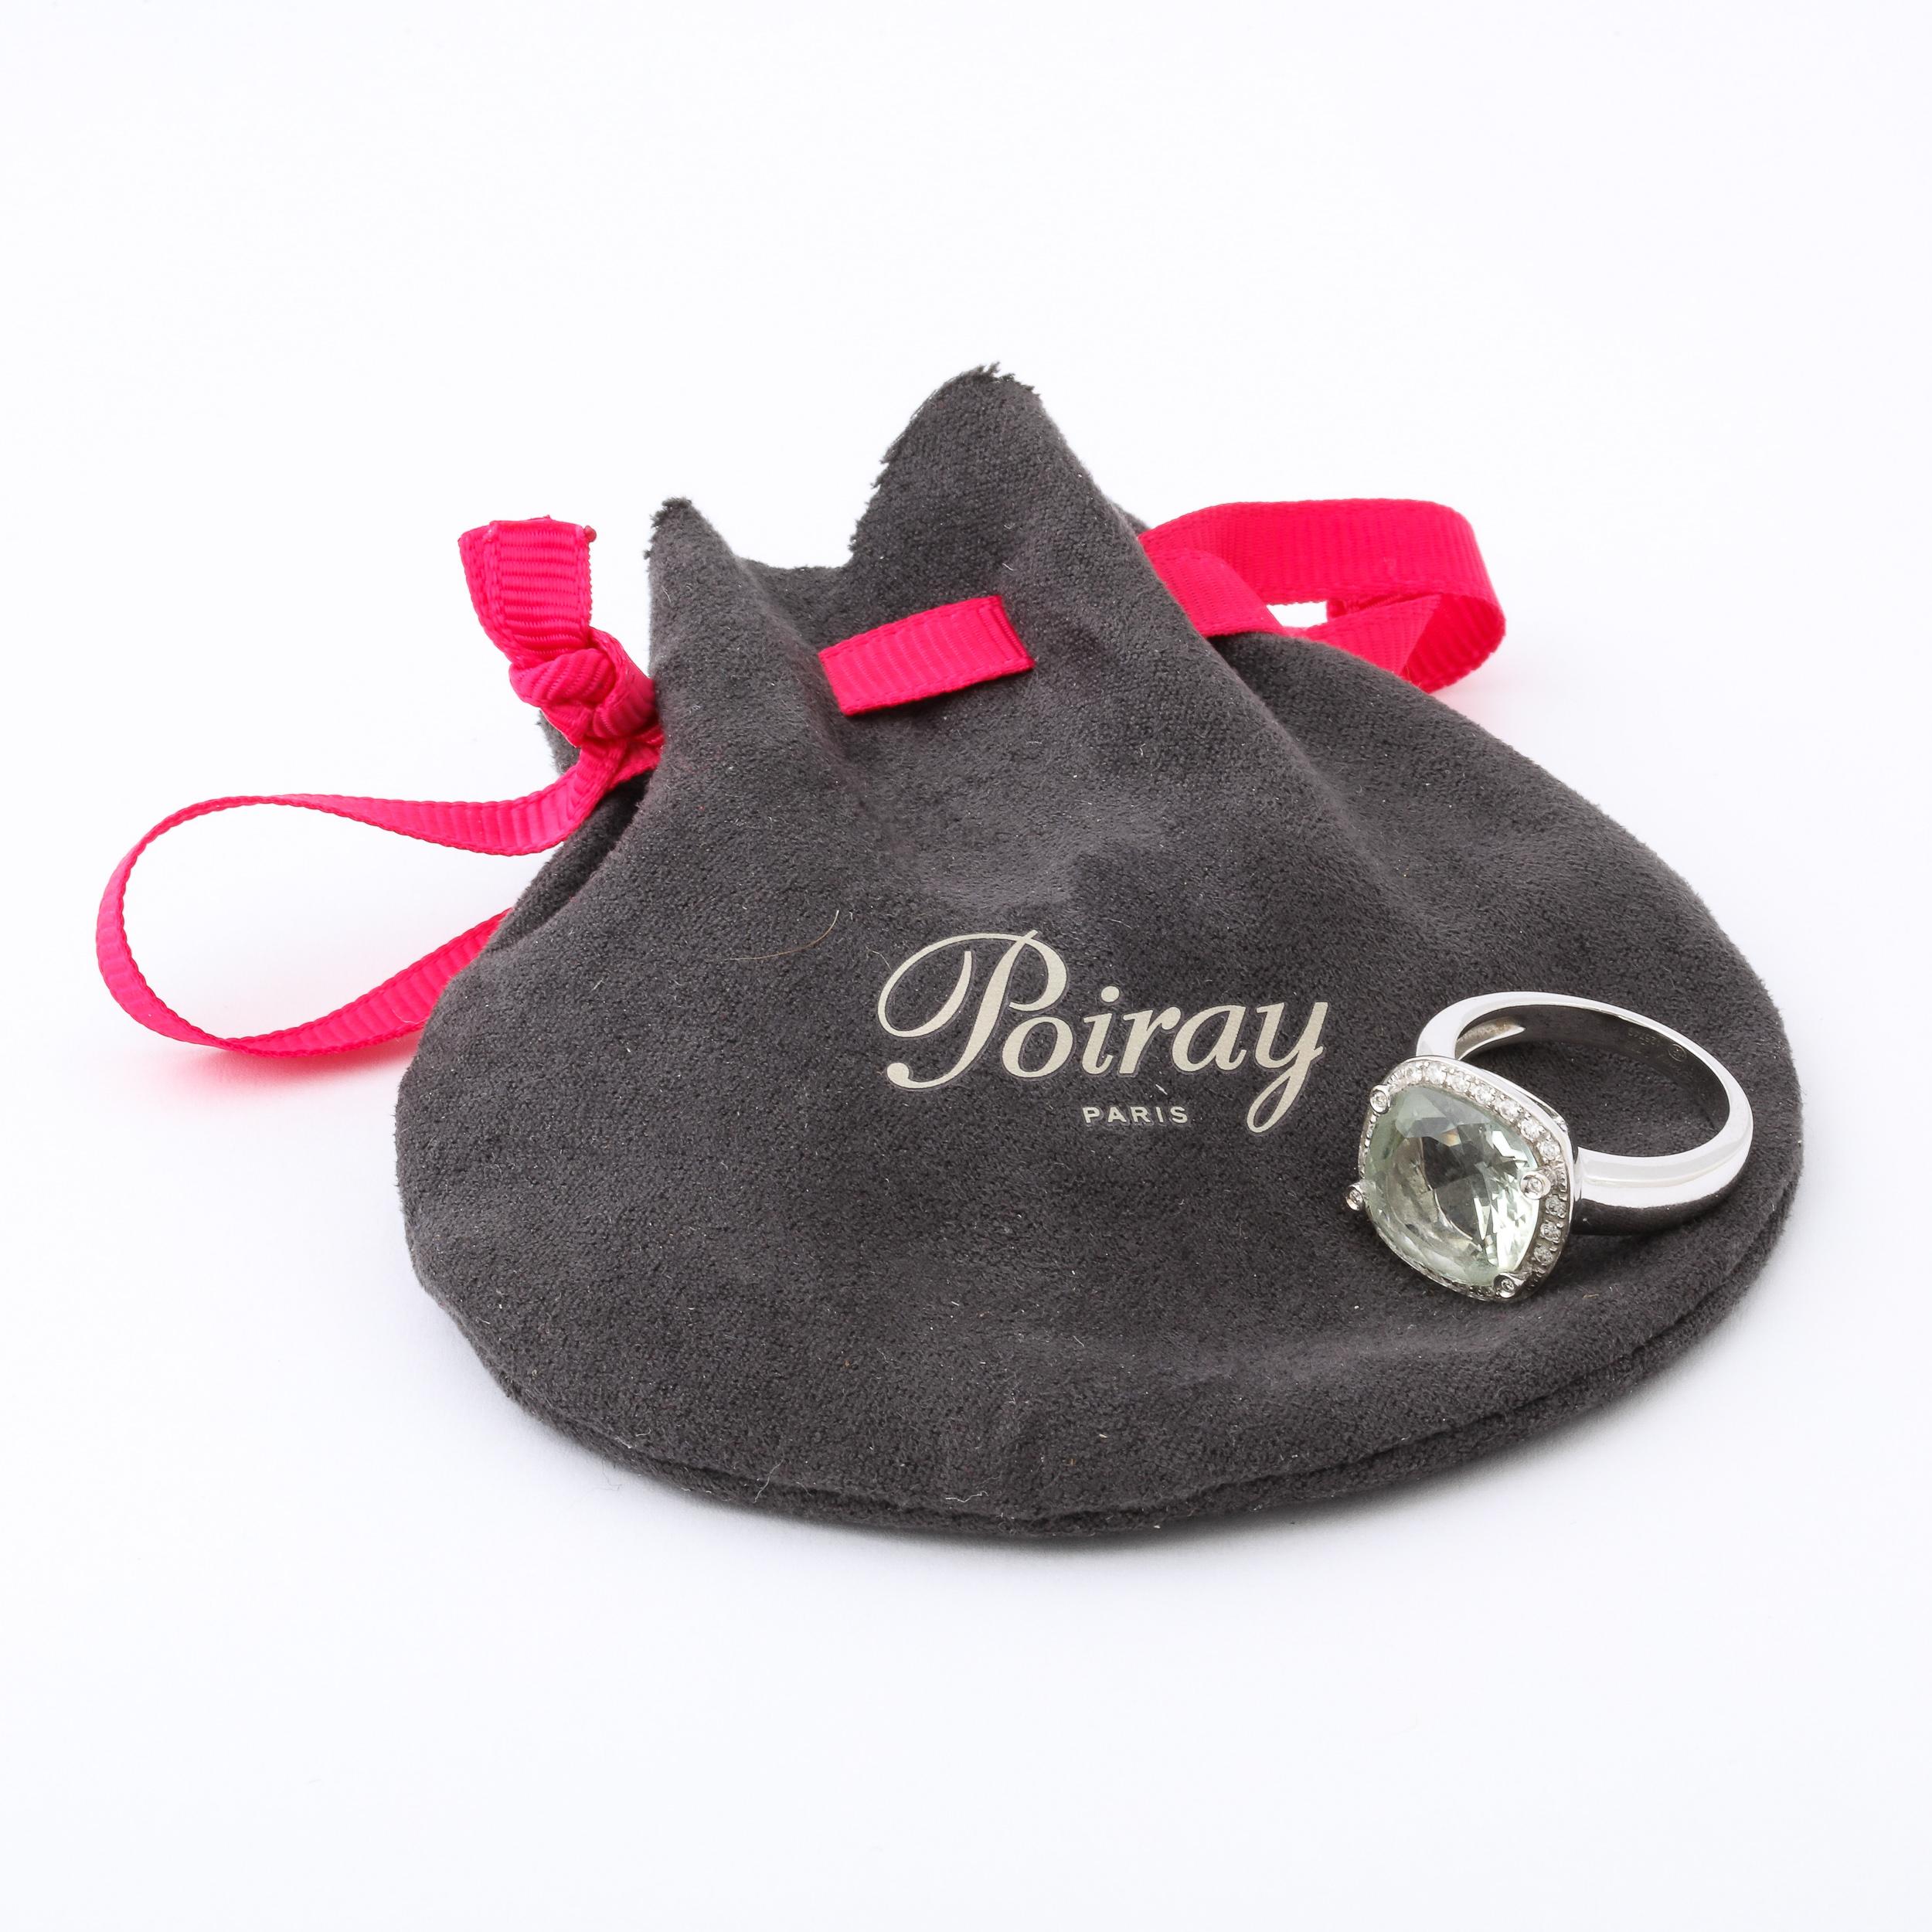 This stunning Poiray of Paris ring is set with a 5 carat Yellow quartz stone with 32 diamonds approximately 22 points all in 18k white gold.It is signed Poiray  and has original suede bag as well.It is currently a size 7 but the purchaser can size